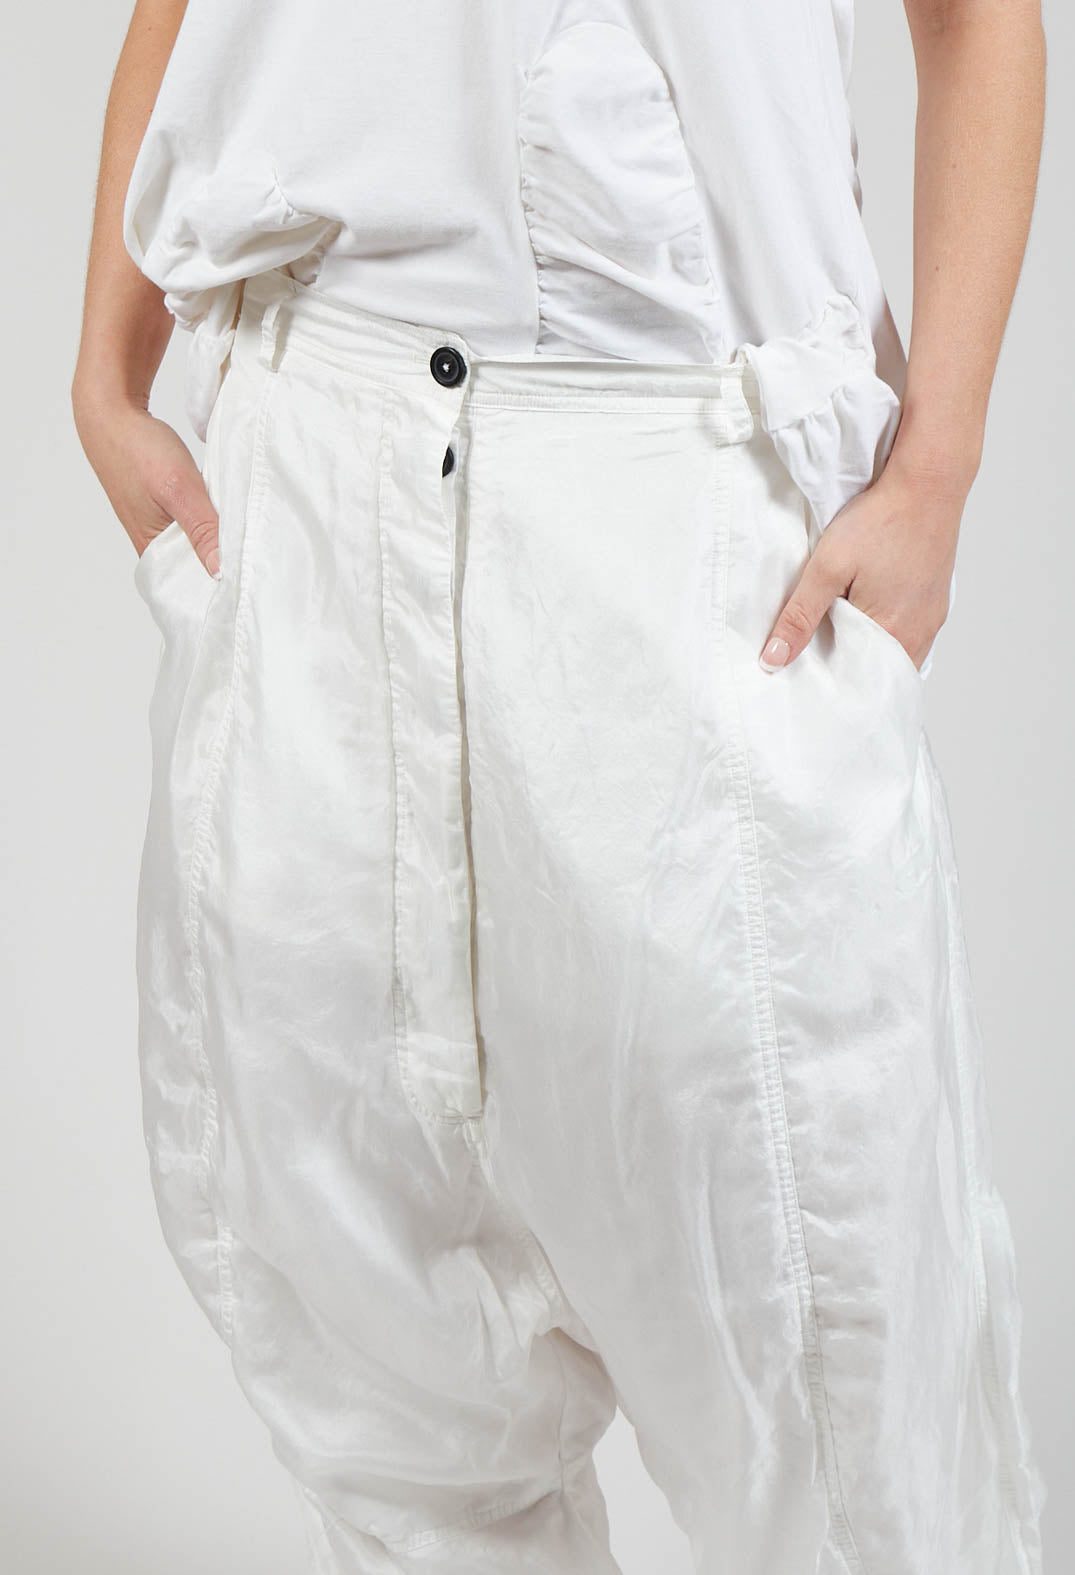 Parachute Trousers in Starwhite